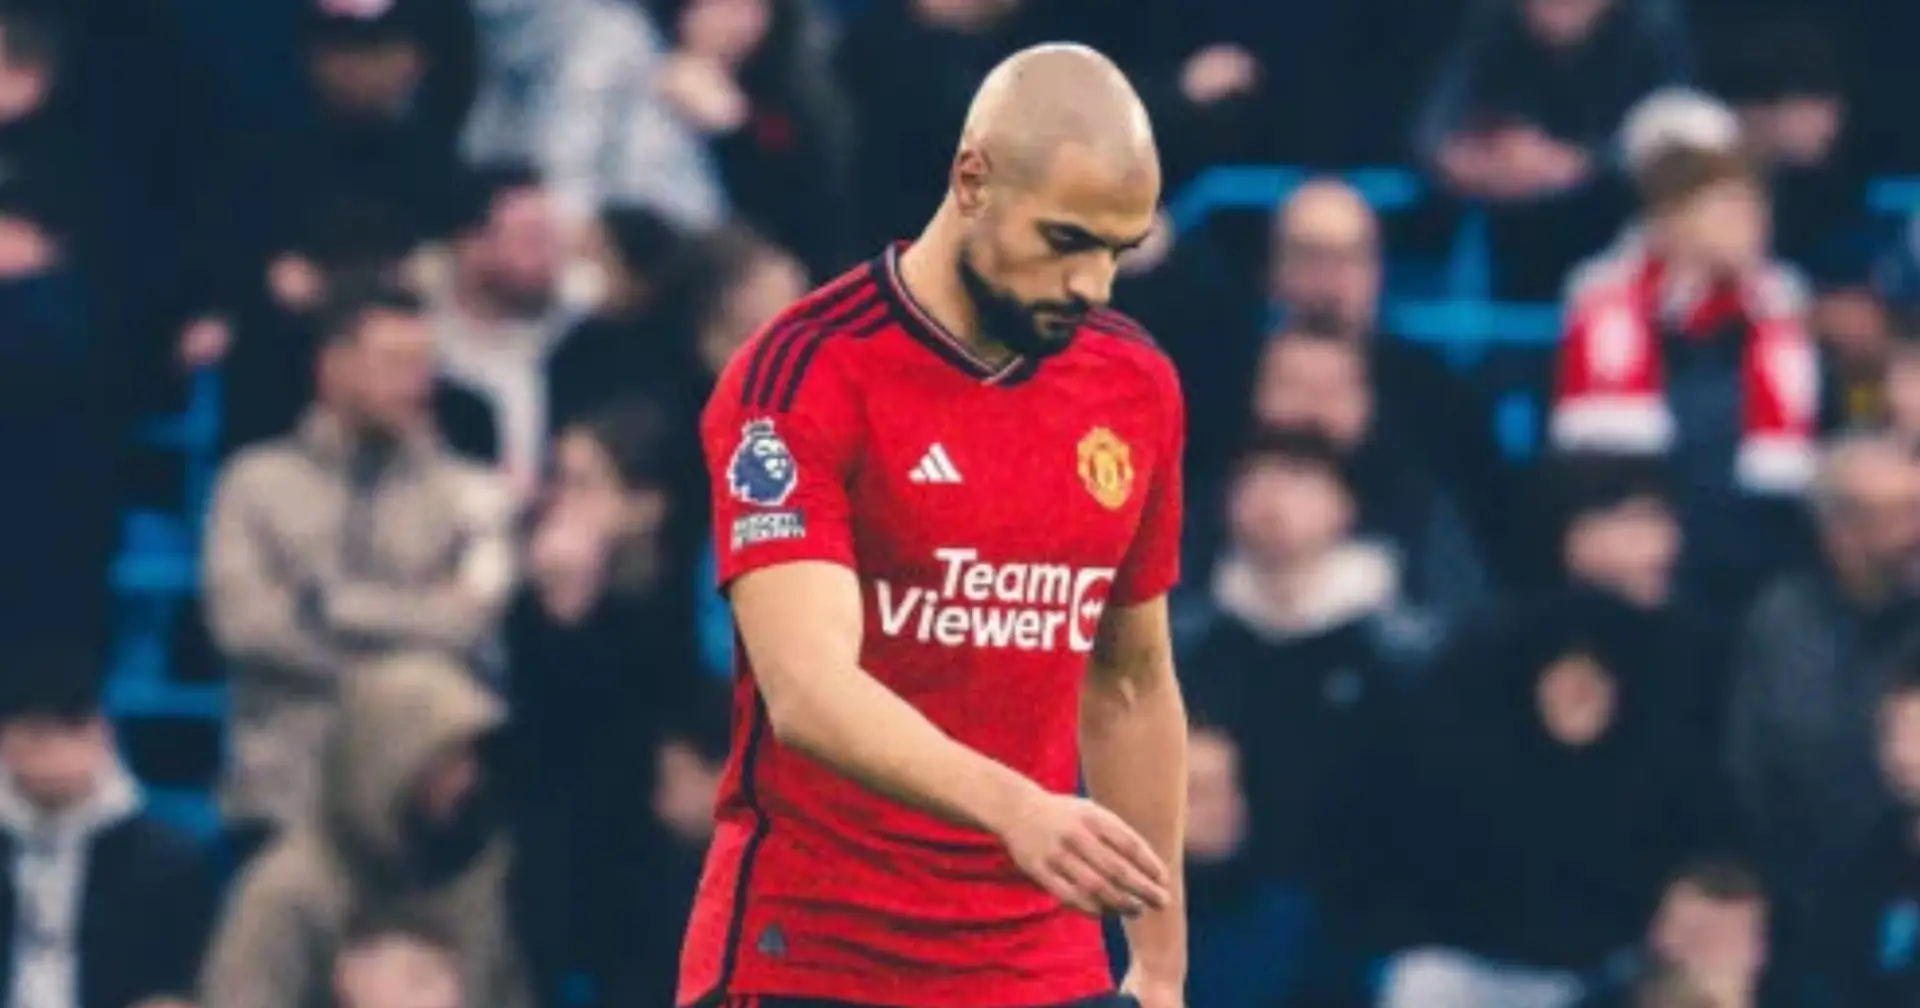 'Anyone see a pattern here?': Man United fans blame Ten Hag after Amrabat disasterclass vs Man City